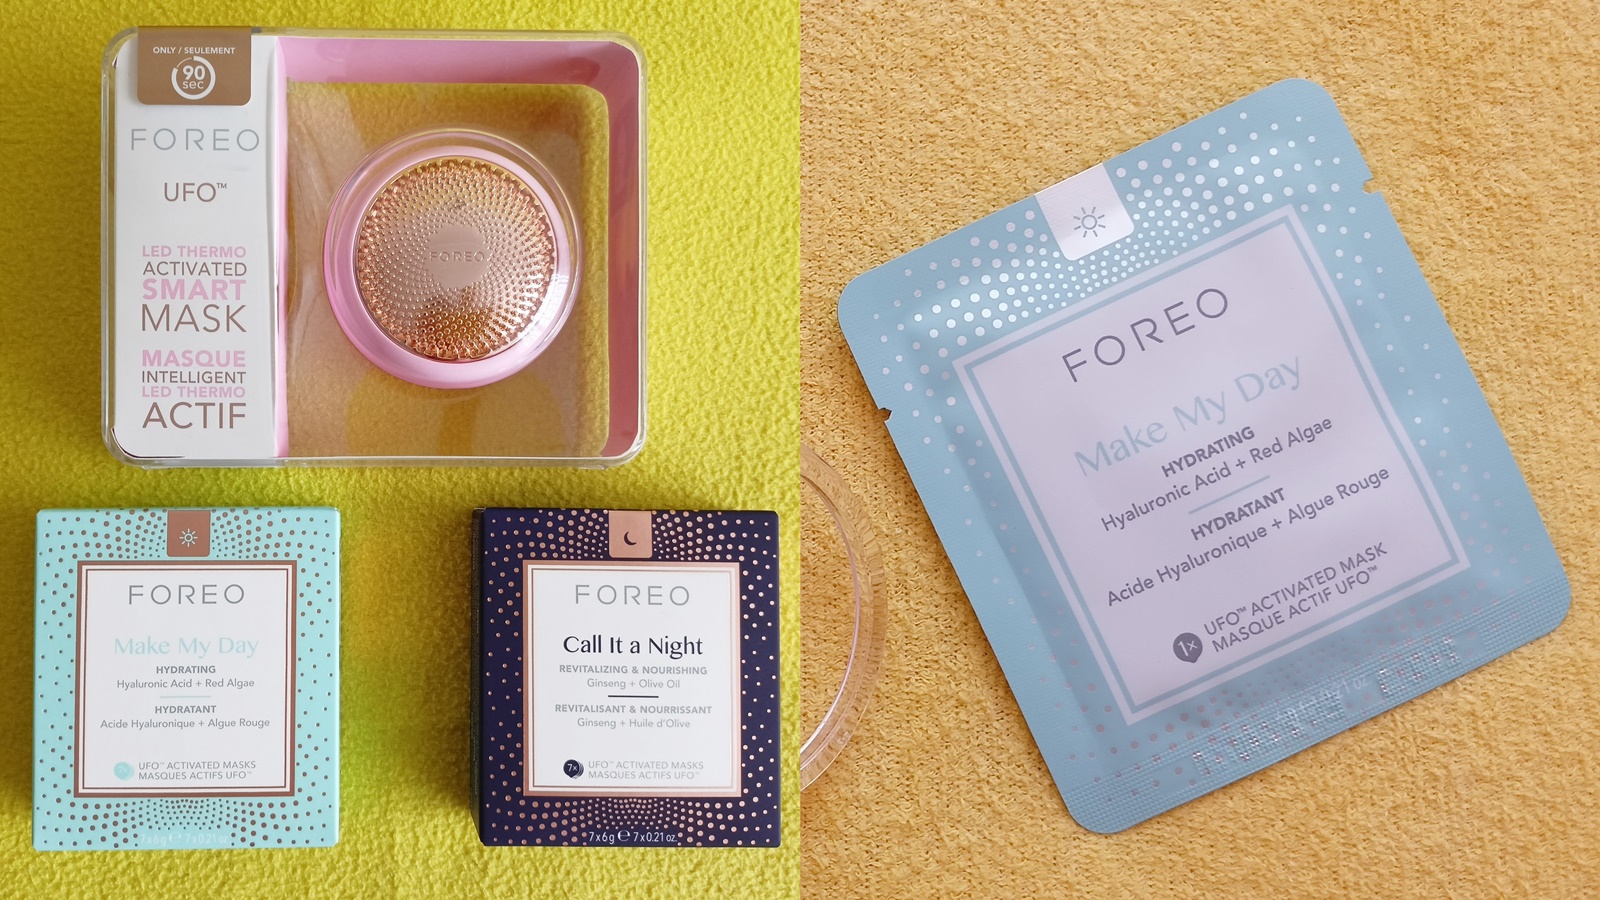 FOREO UFO Review: Sonic device for accelerating the effects of facial masks